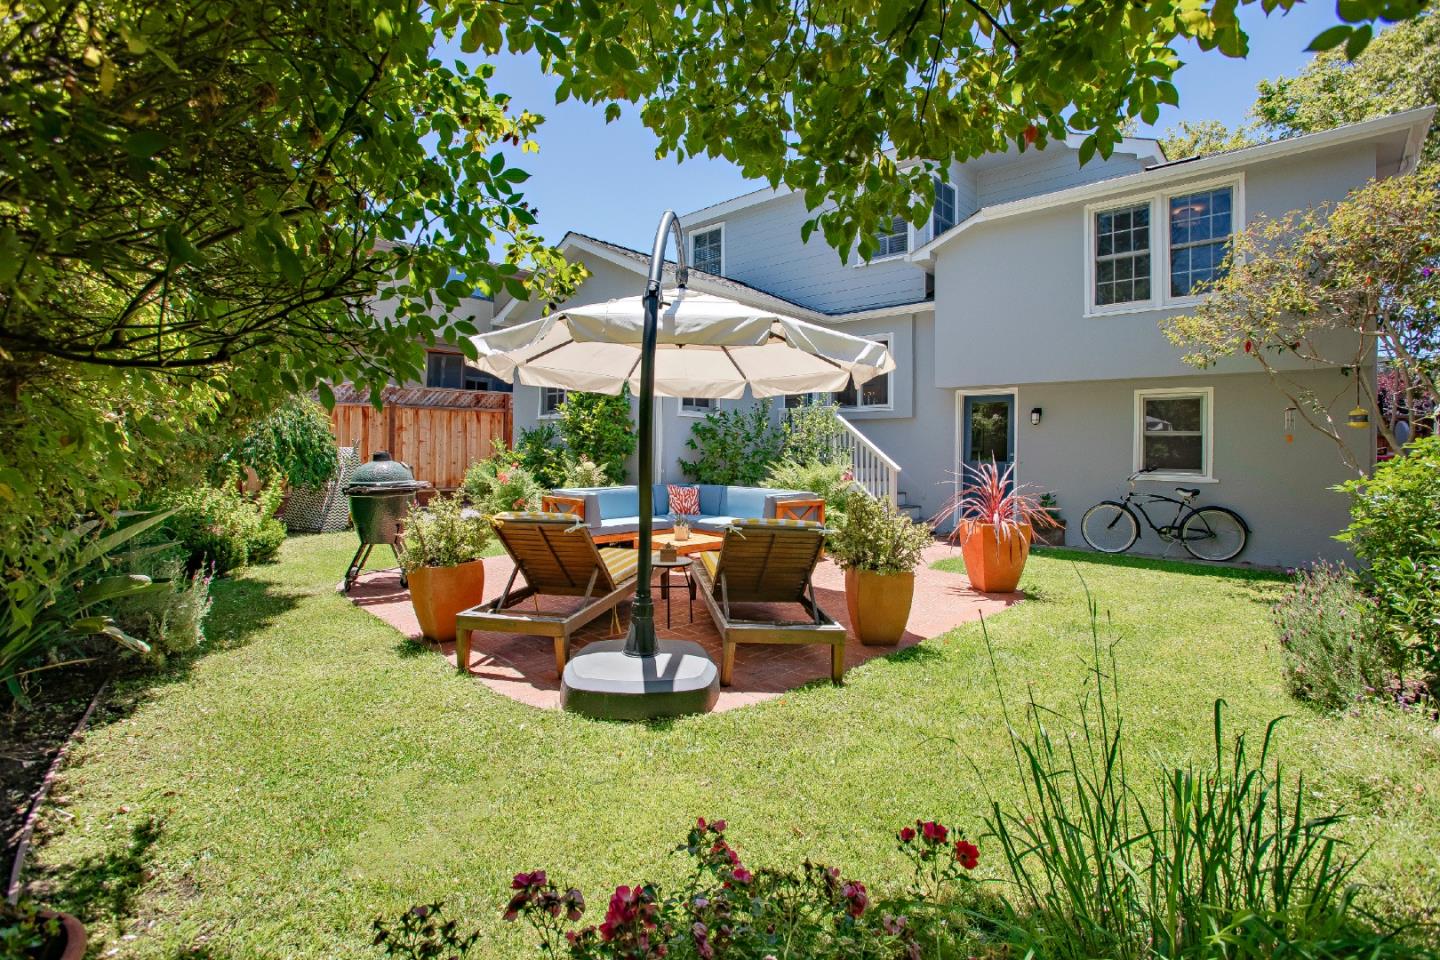 2671 Isabelle Ave San Mateo Ca 94403 Sotheby S International Realty Inc